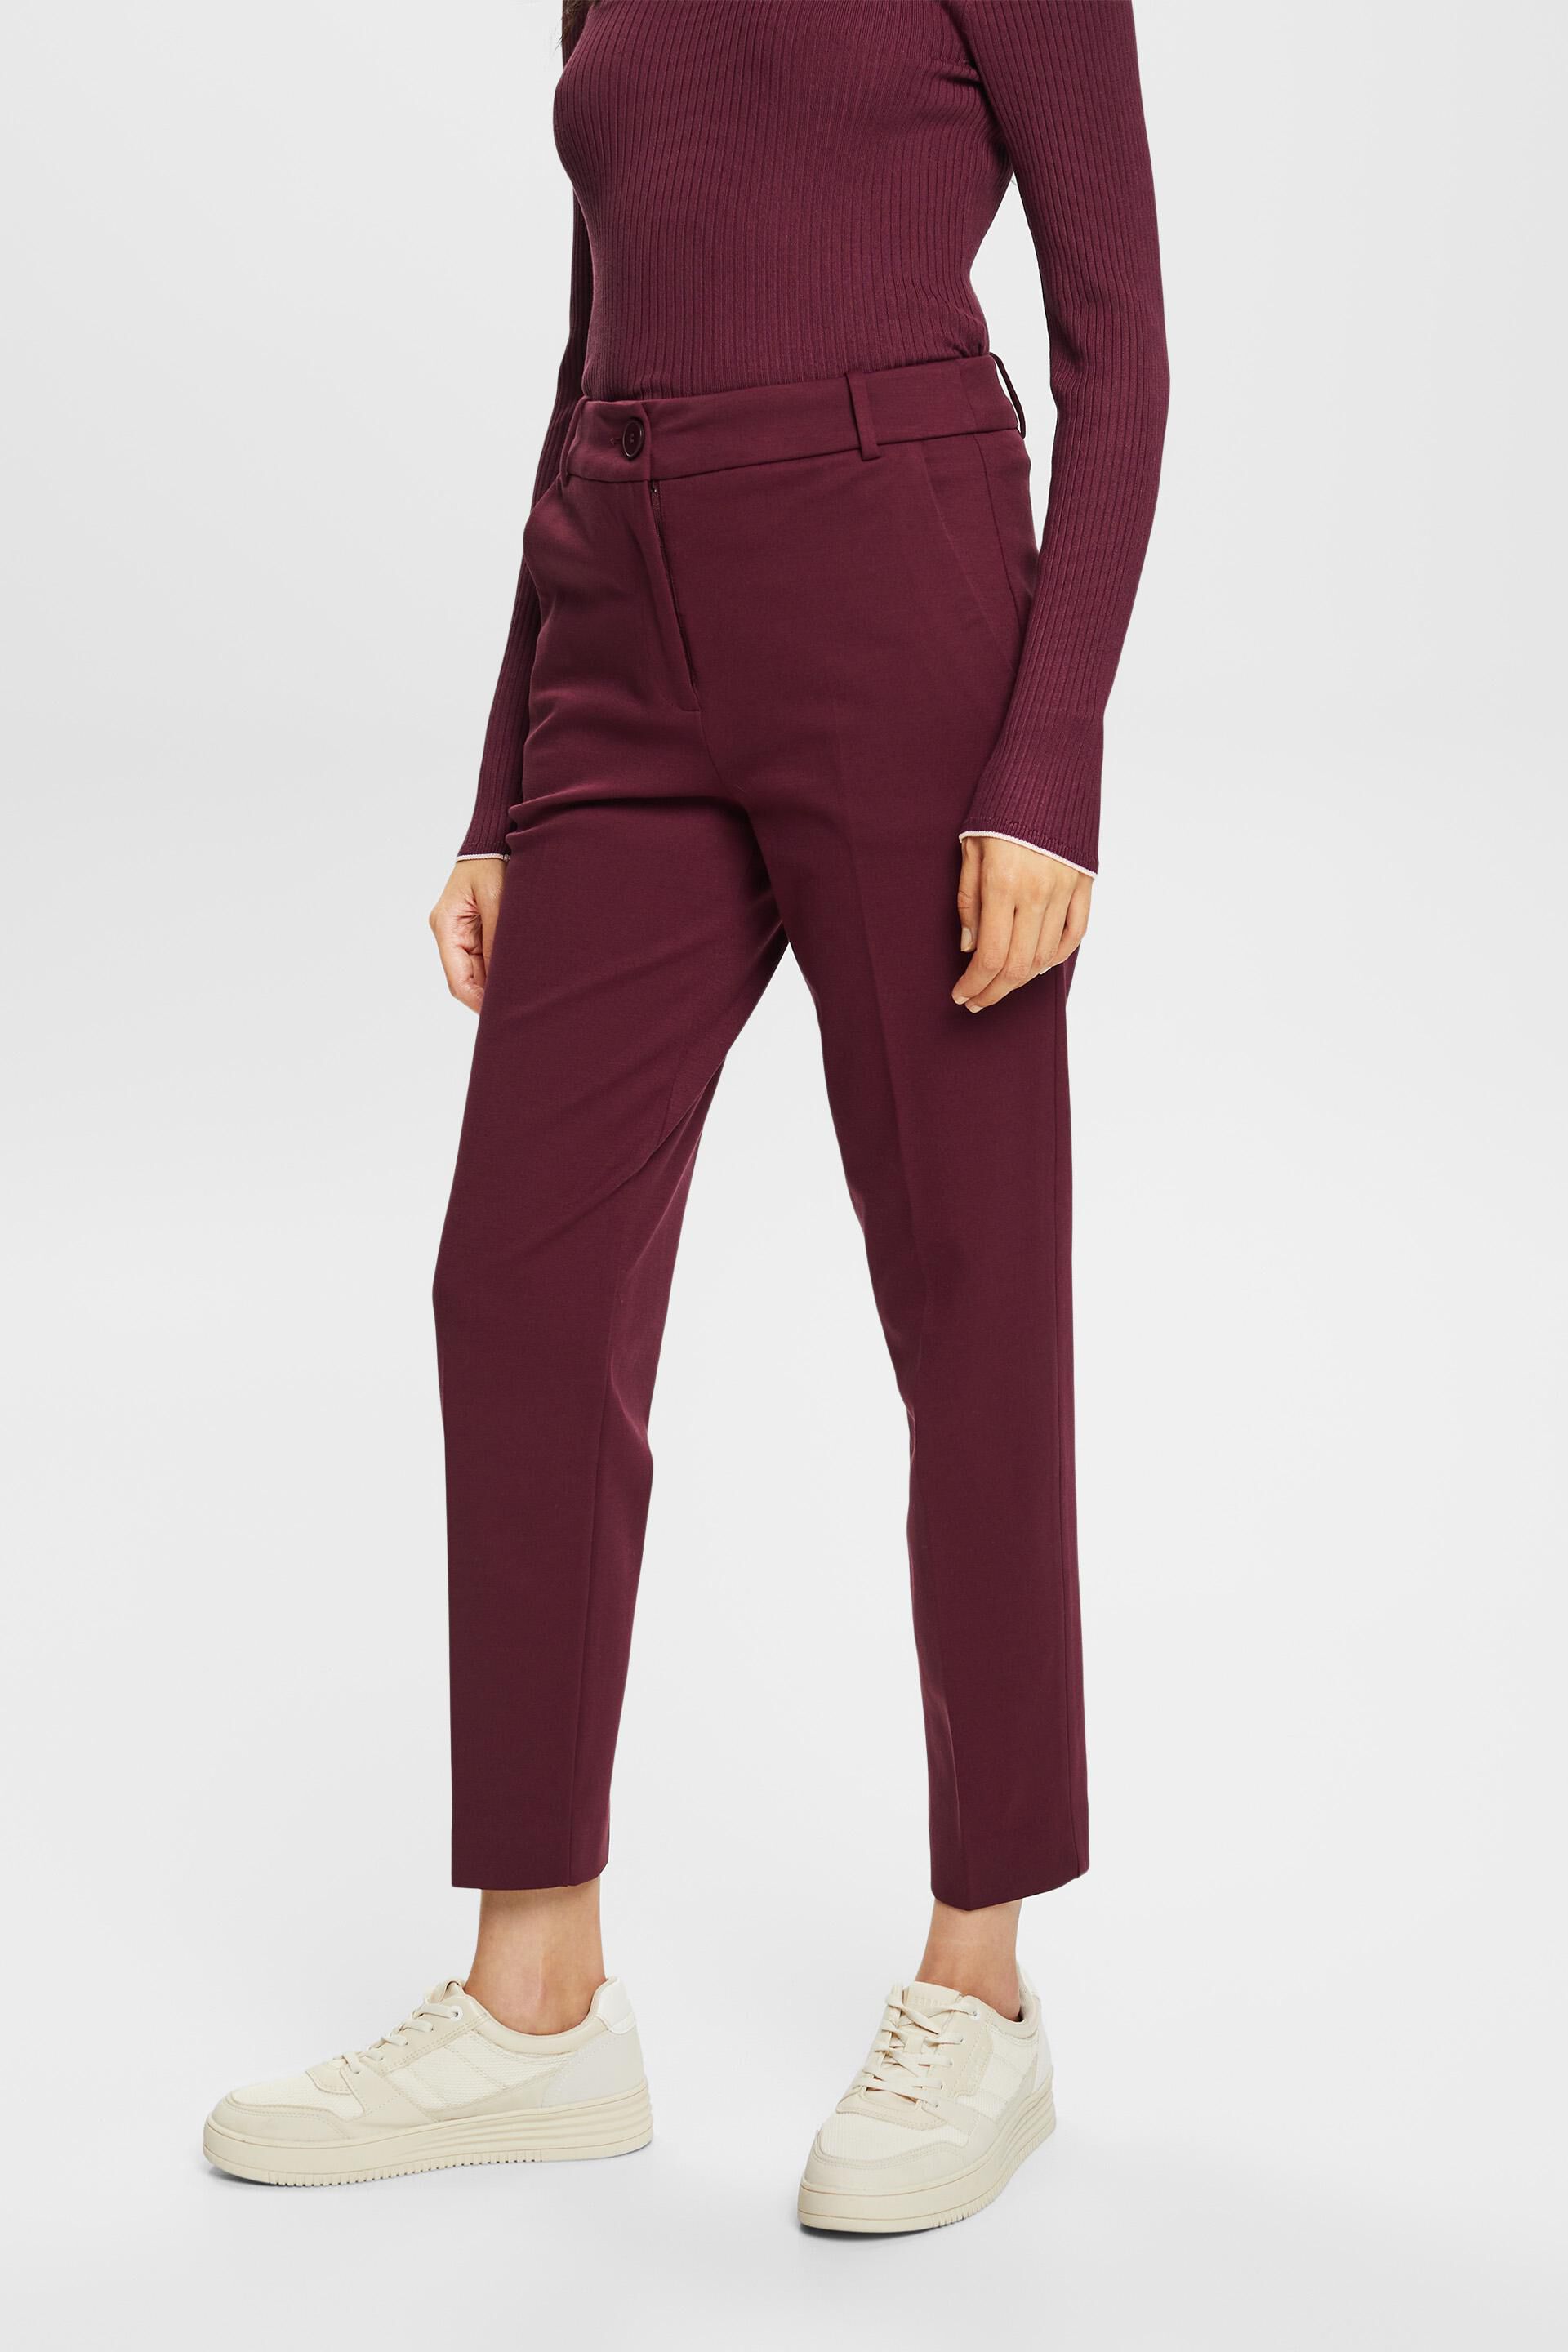 Esprit PUNTO tapered trousers SPORTY match mix &